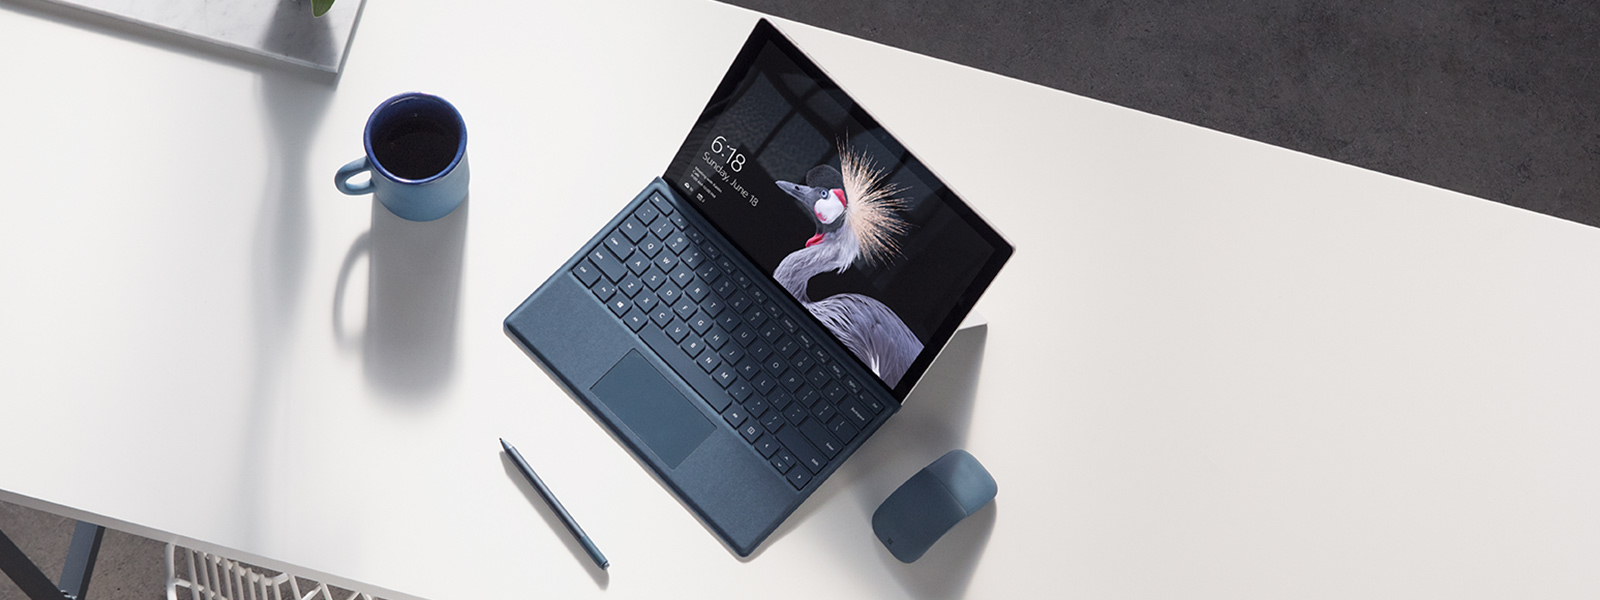 Image of Surface Pro device on the bench with Surface Pen. image 